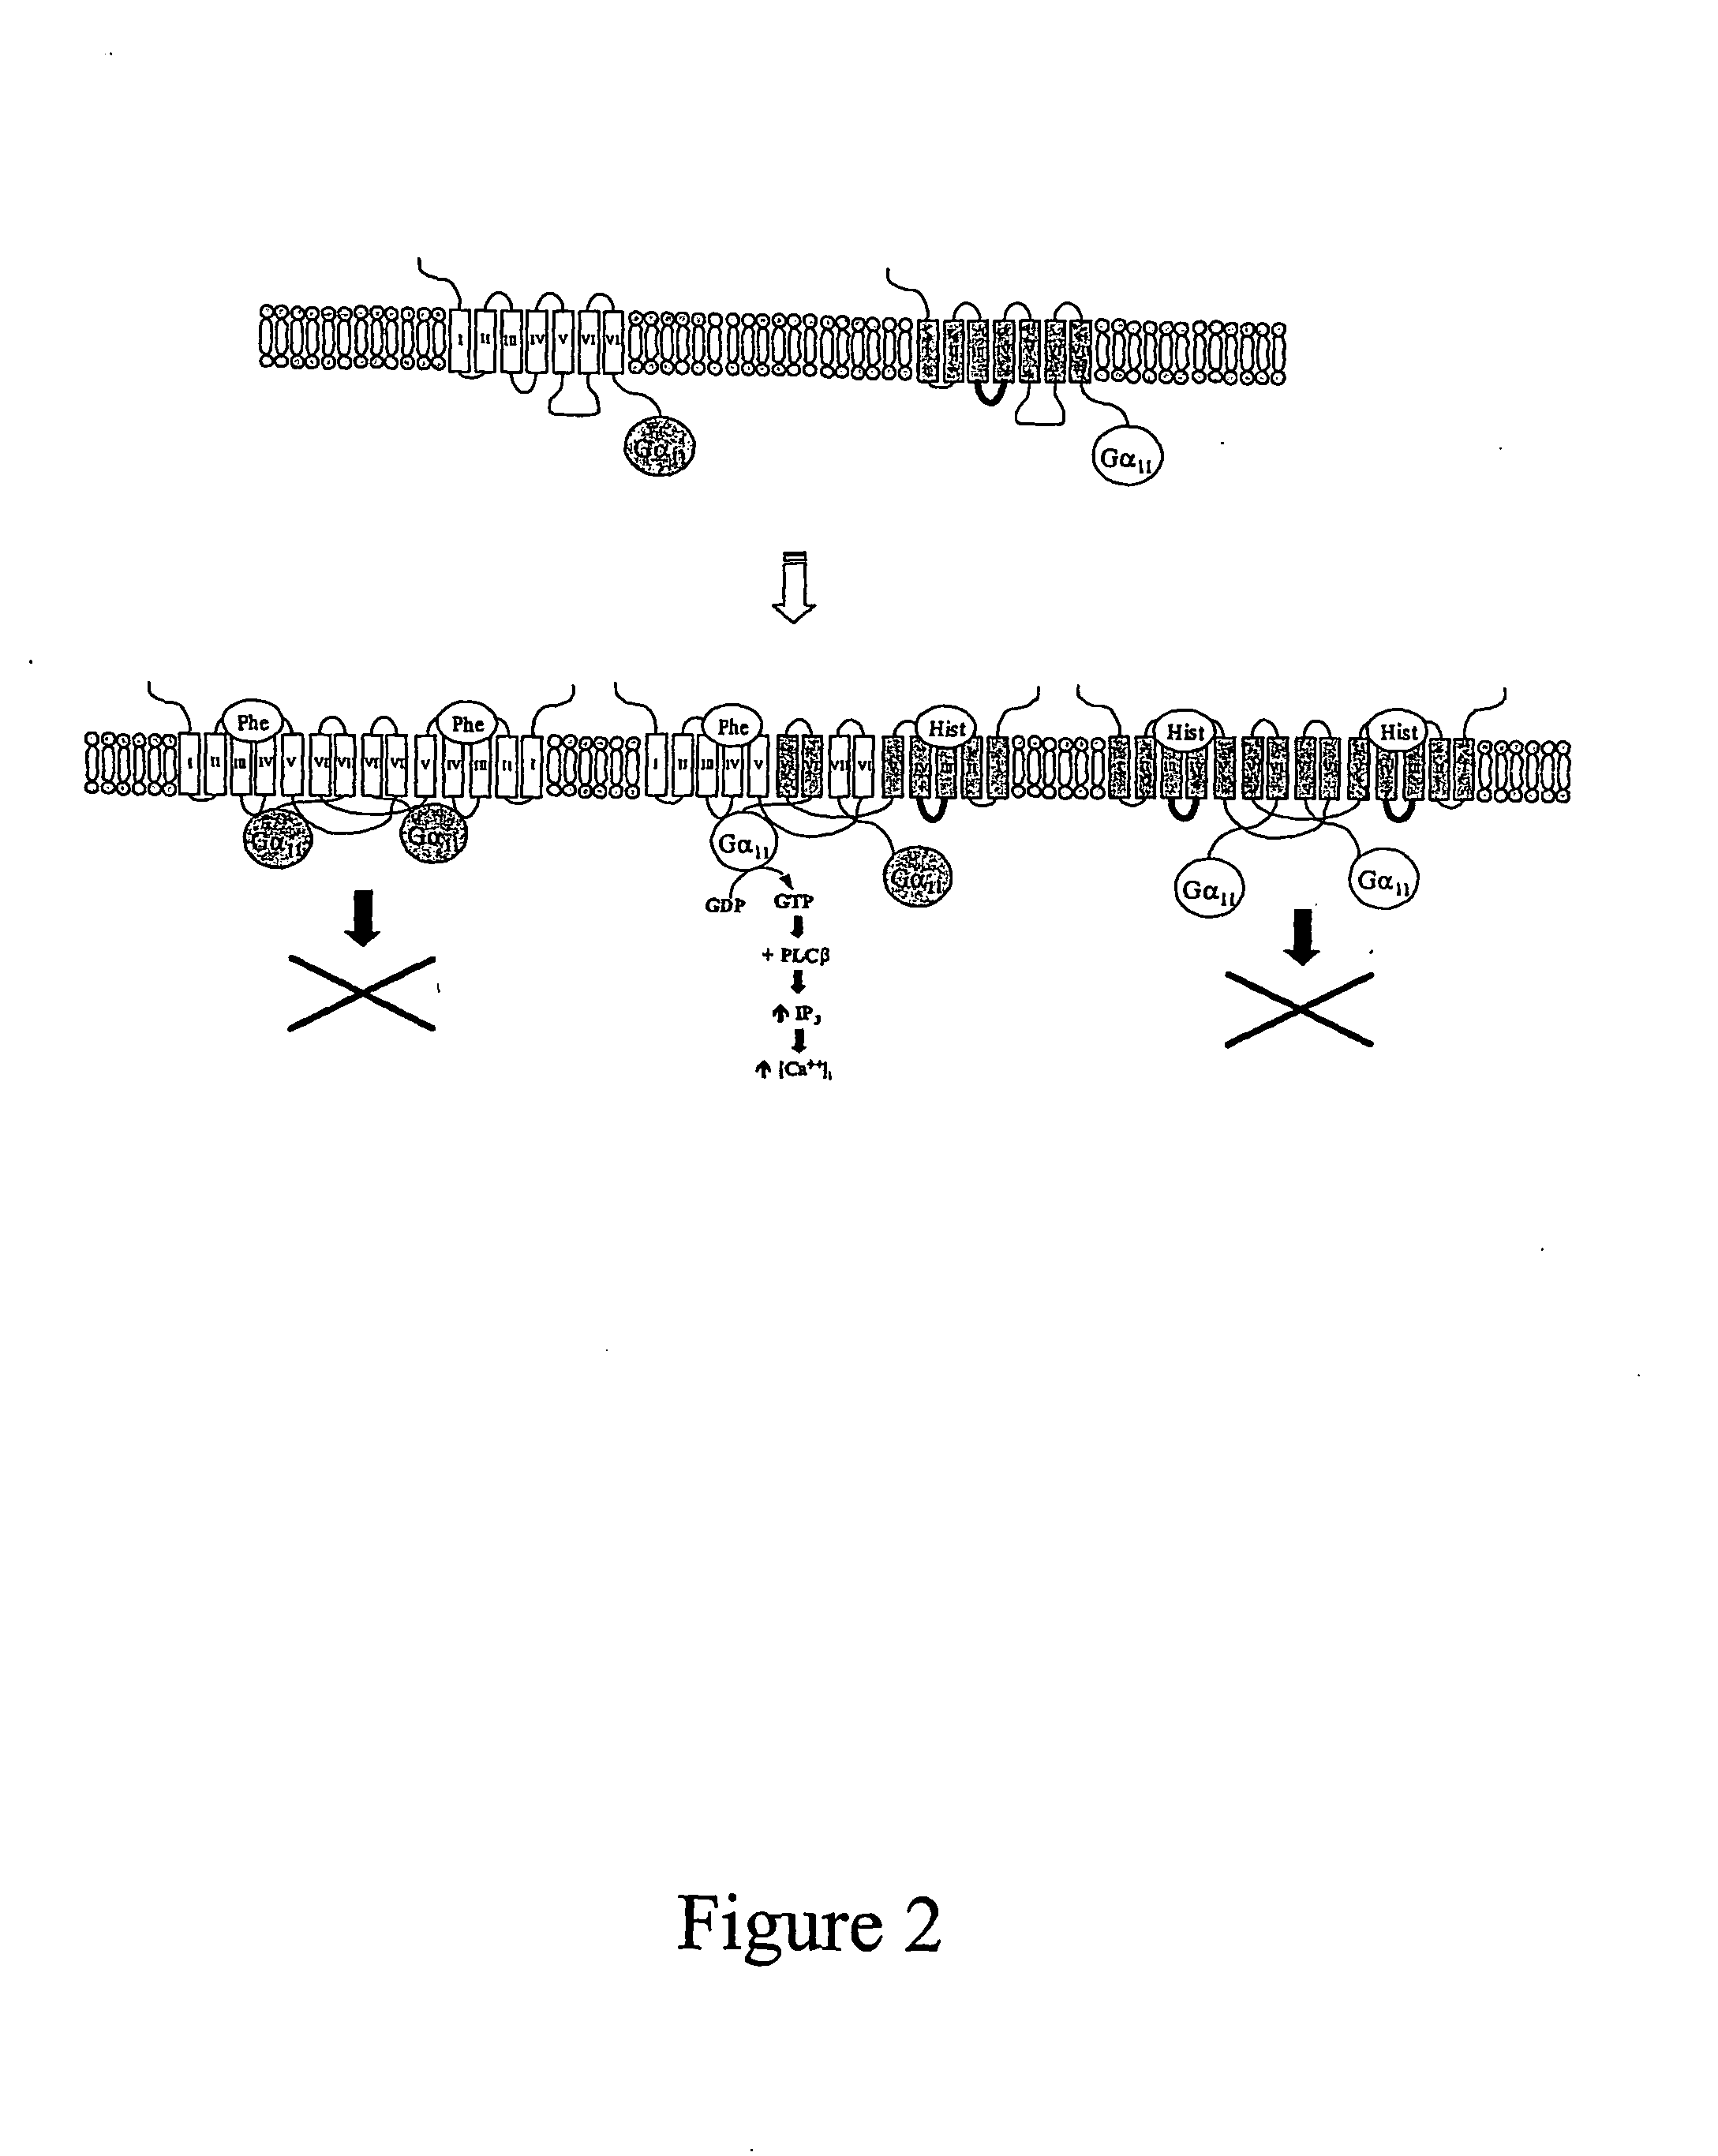 Materials and methods relating to g-protein coupled receptor oligomers